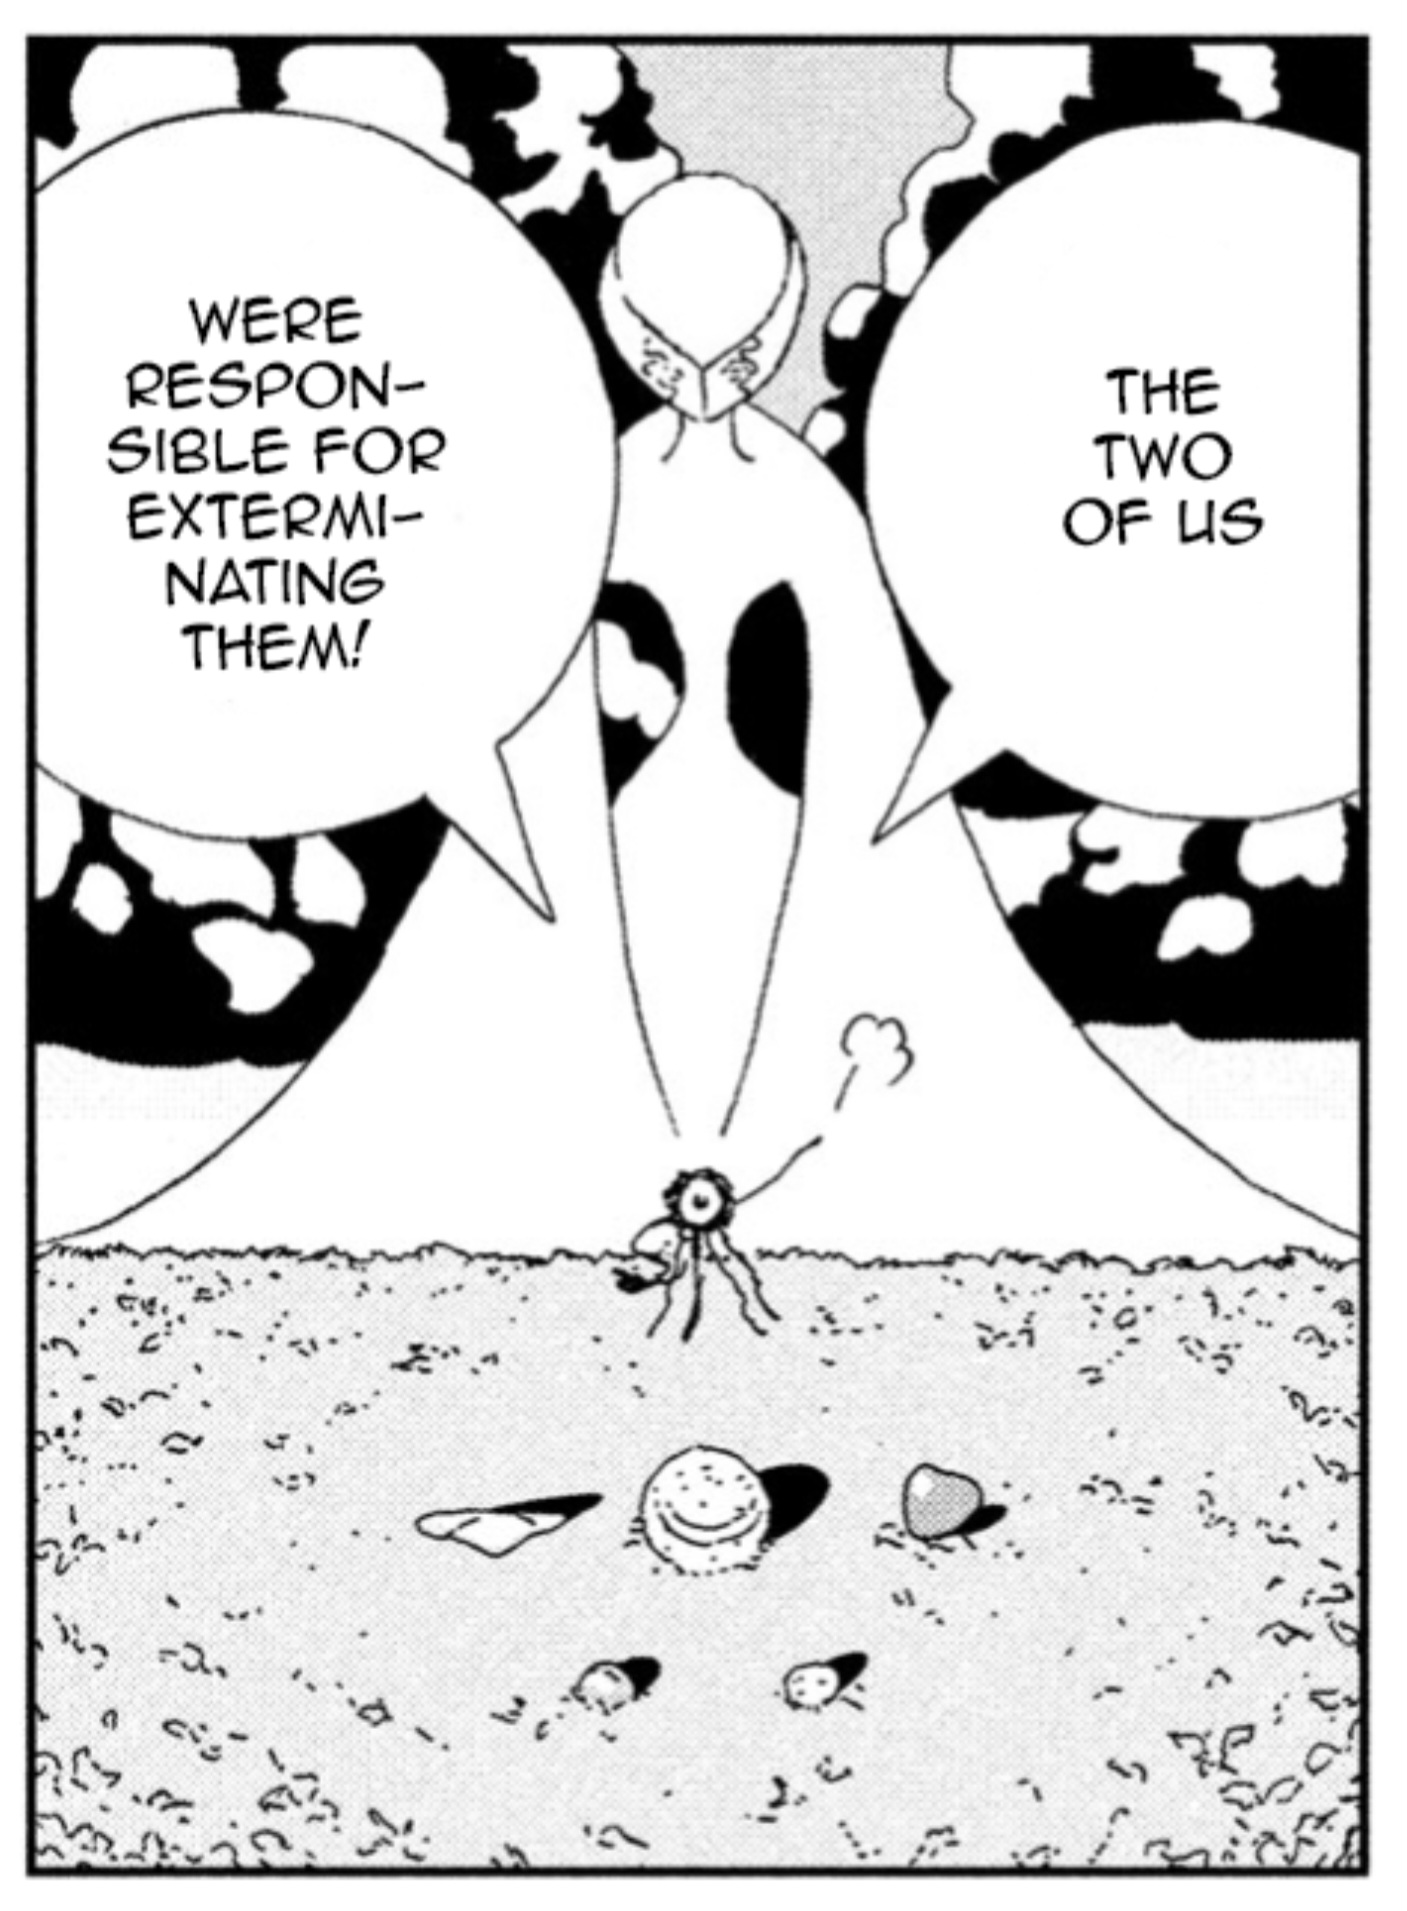 Land Of The Lustrous 103 Houseki no Kuni Chapter 102 Discussion - Forums - MyAnimeList.net